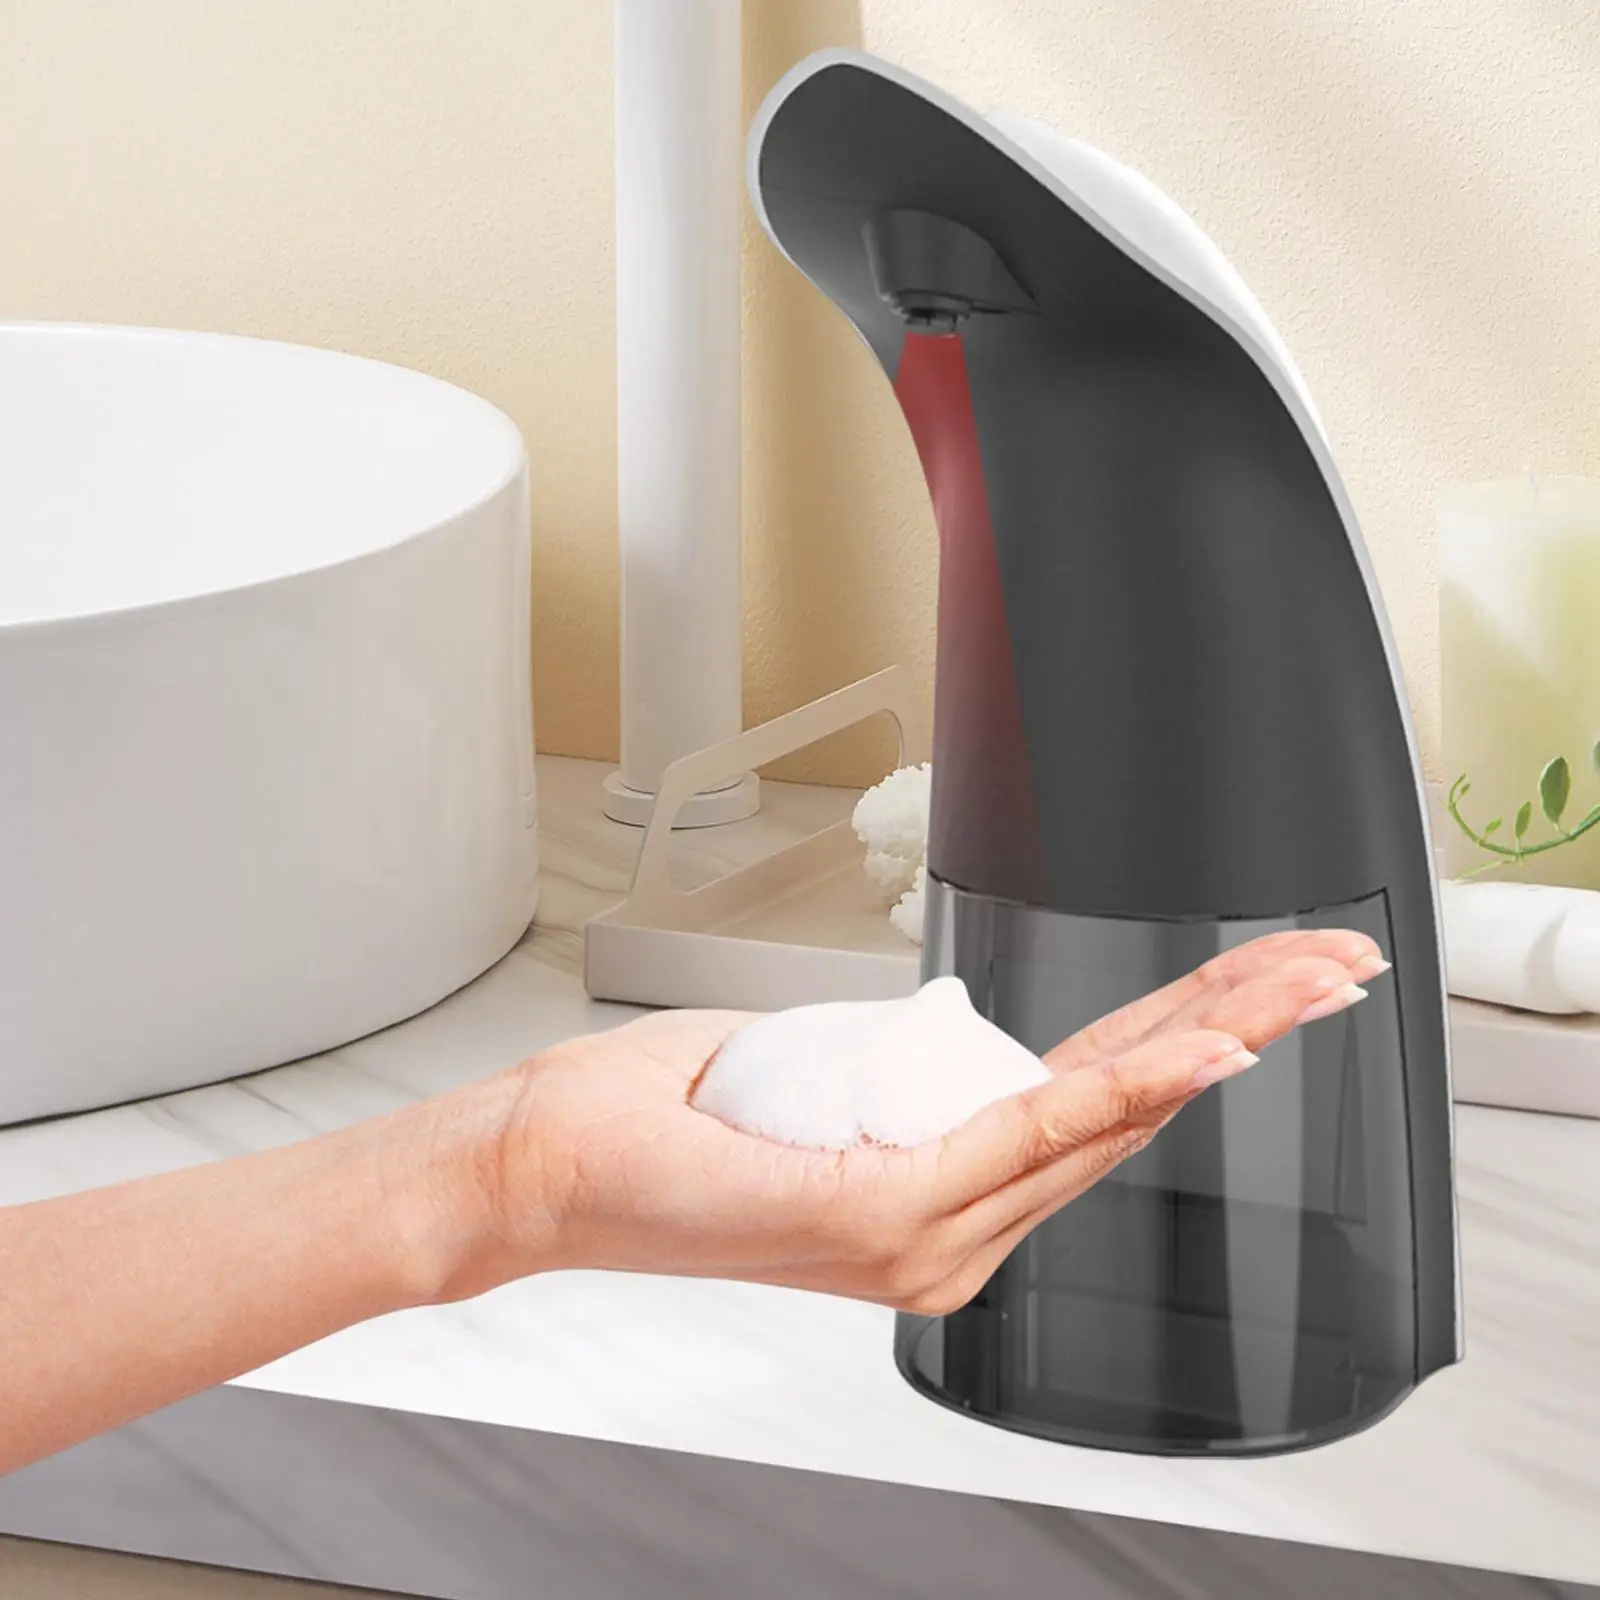 Automatic Induction Foam Liquid Soap Dispenser Non Contact Tool Hands Free Hand Washer for Kitchen Toilet Hotel